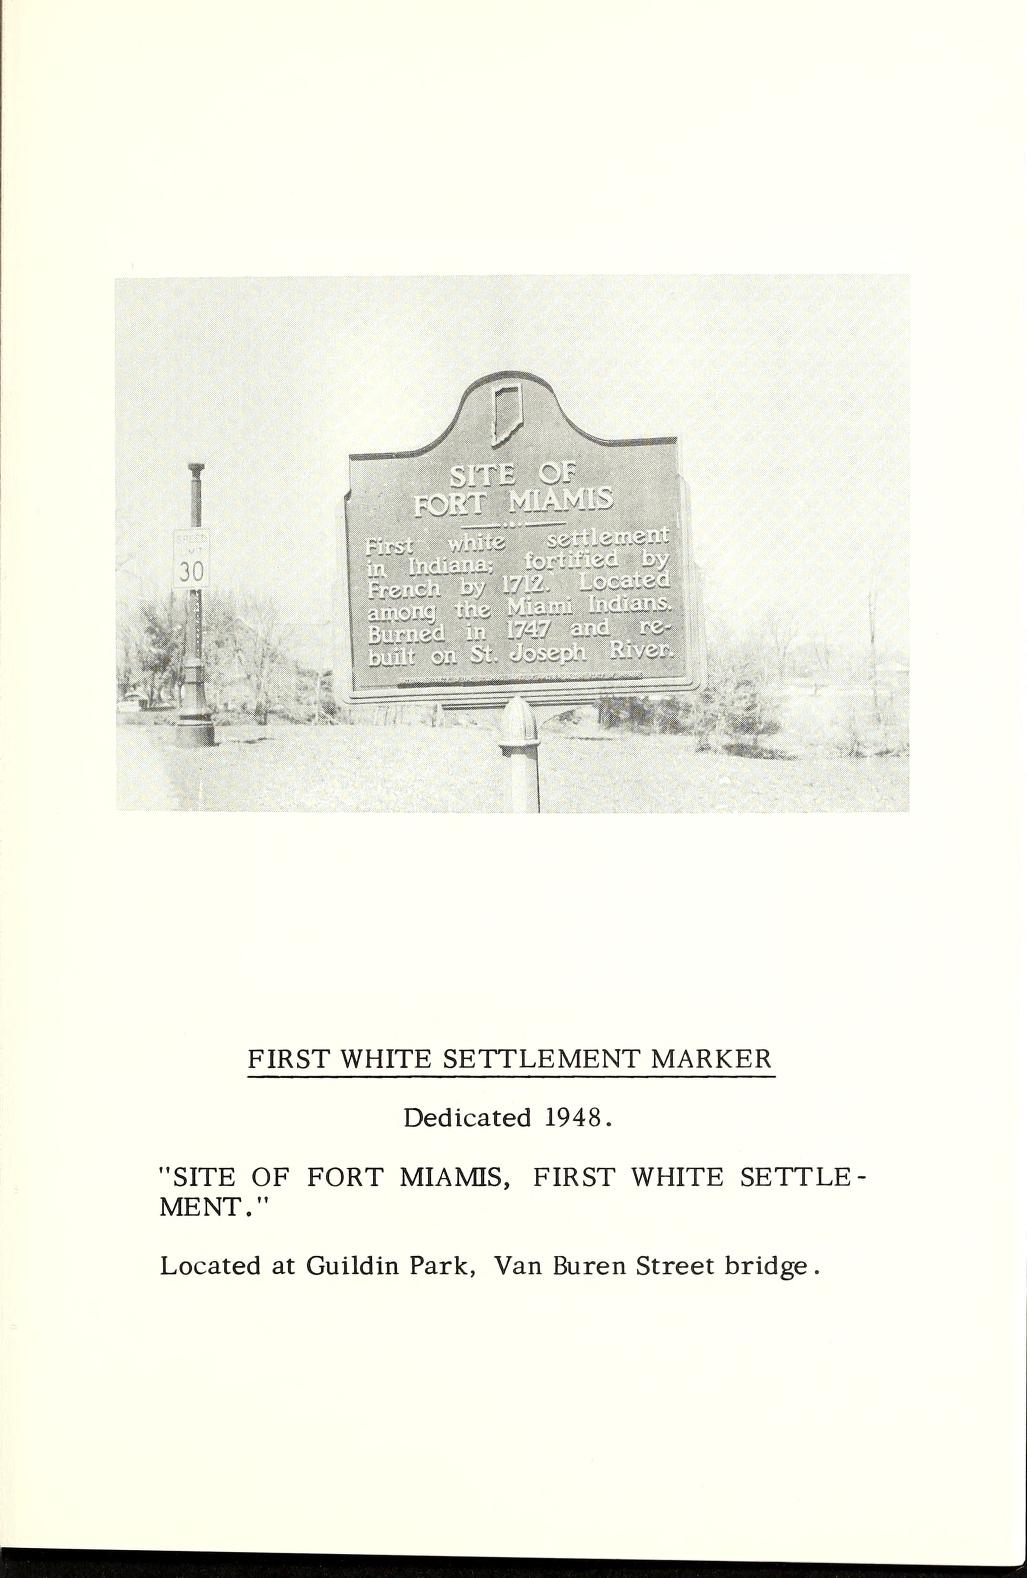 Site of Fort Miamis 1948 marker